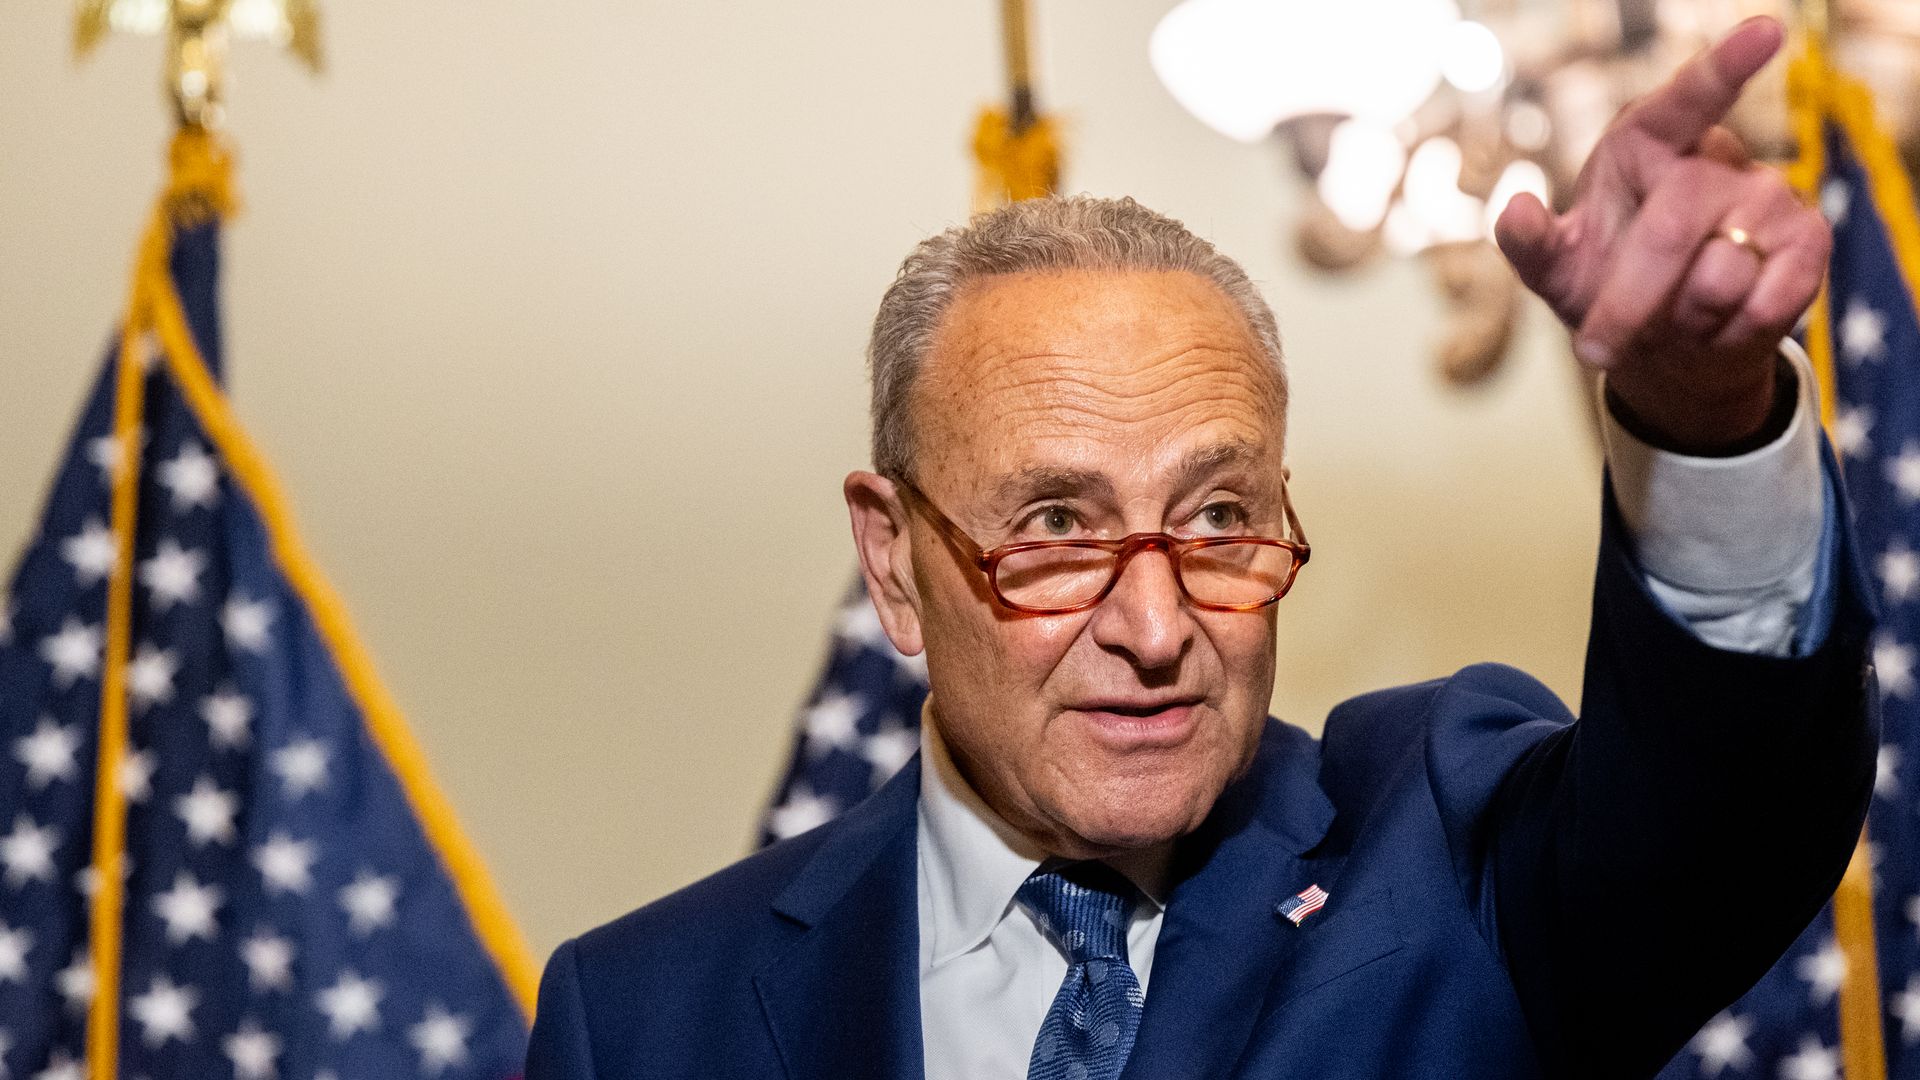 Chuck Schumer sticks his finger in the air